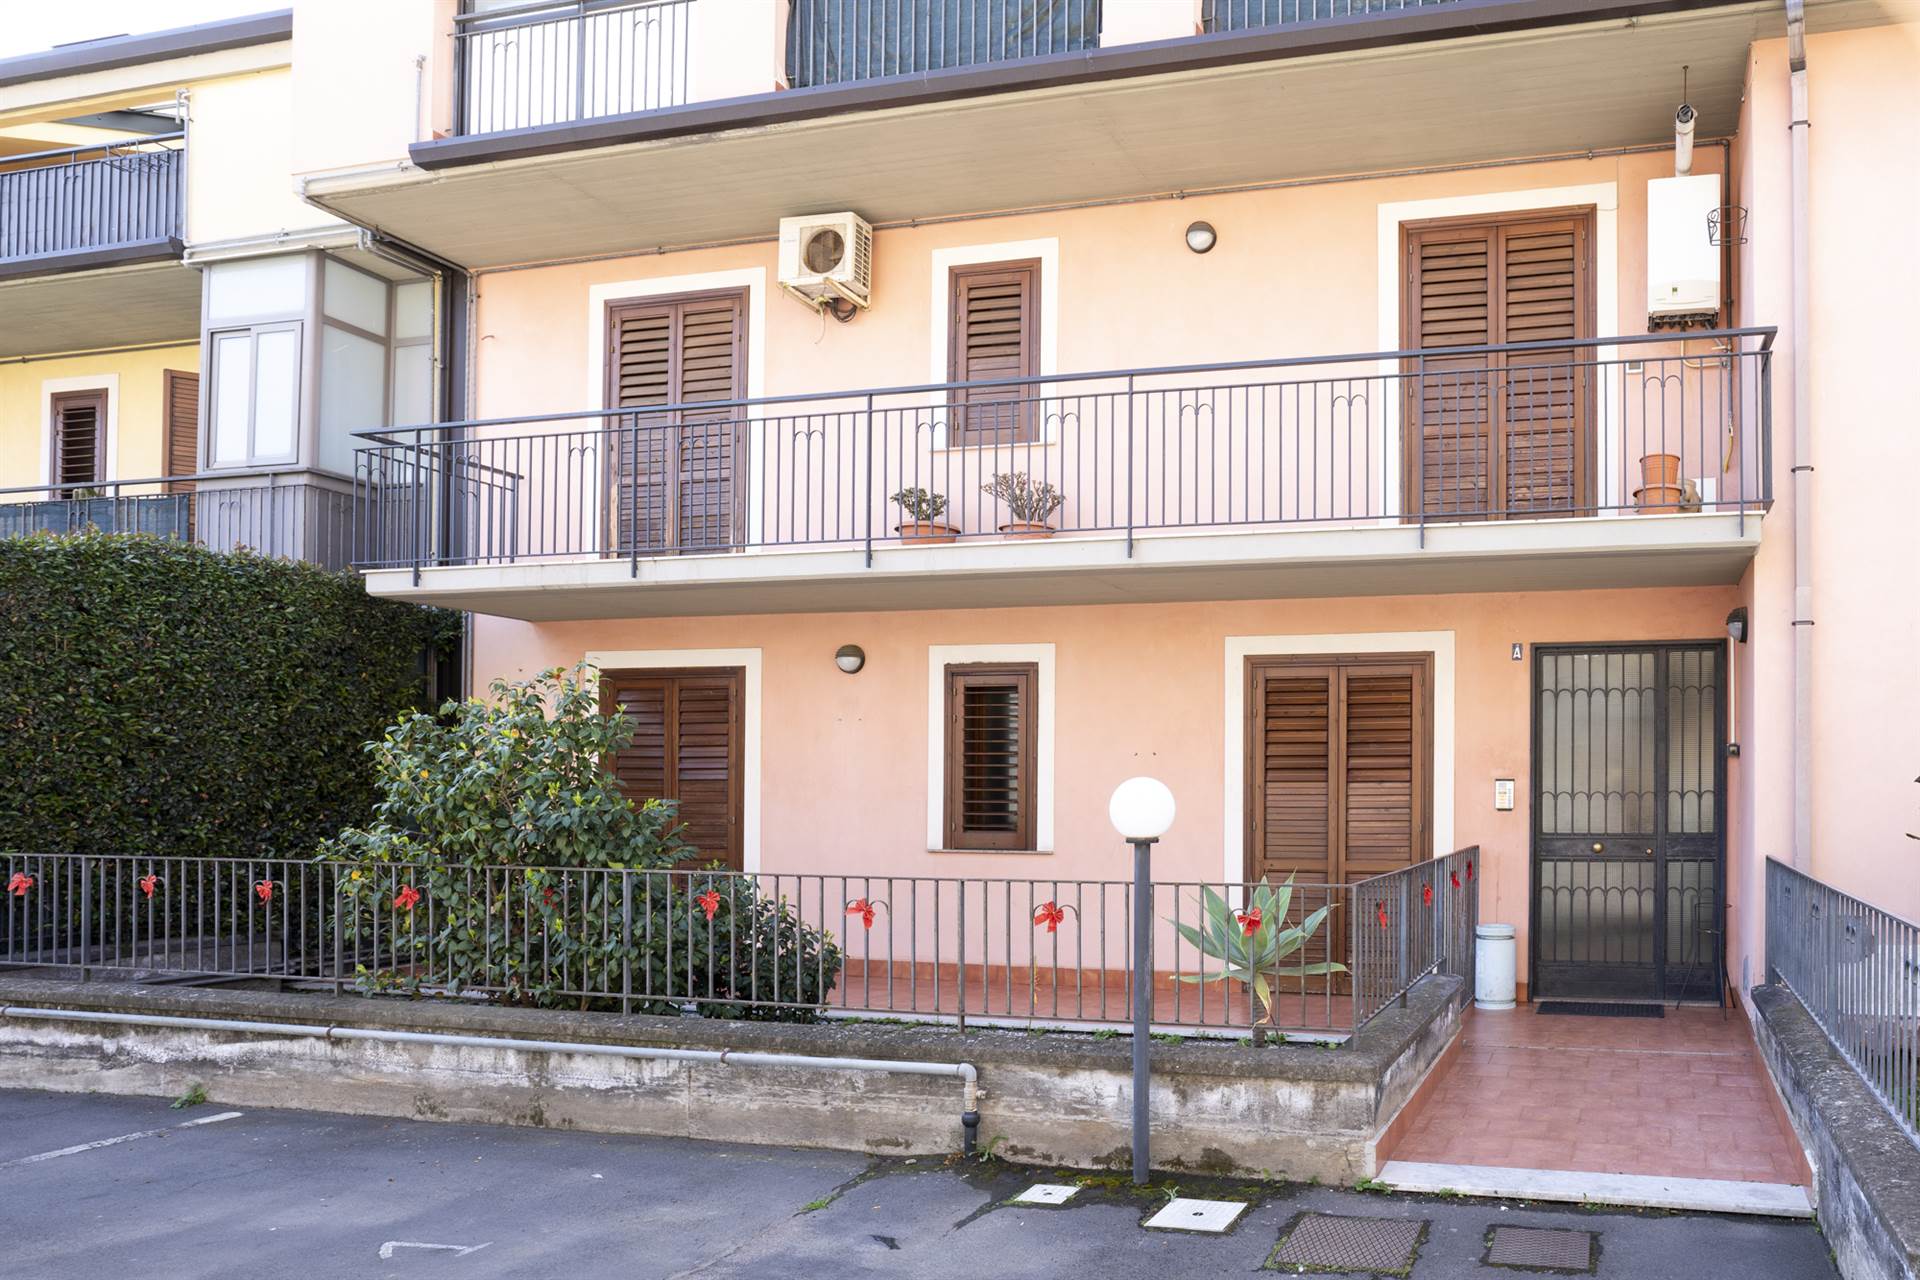 ACI CATENA, Apartment for sale of 115 Sq. mt., Good condition, Heating Individual heating system, Energetic class: E, Epi: 73,46 kwh/m2 year, placed 